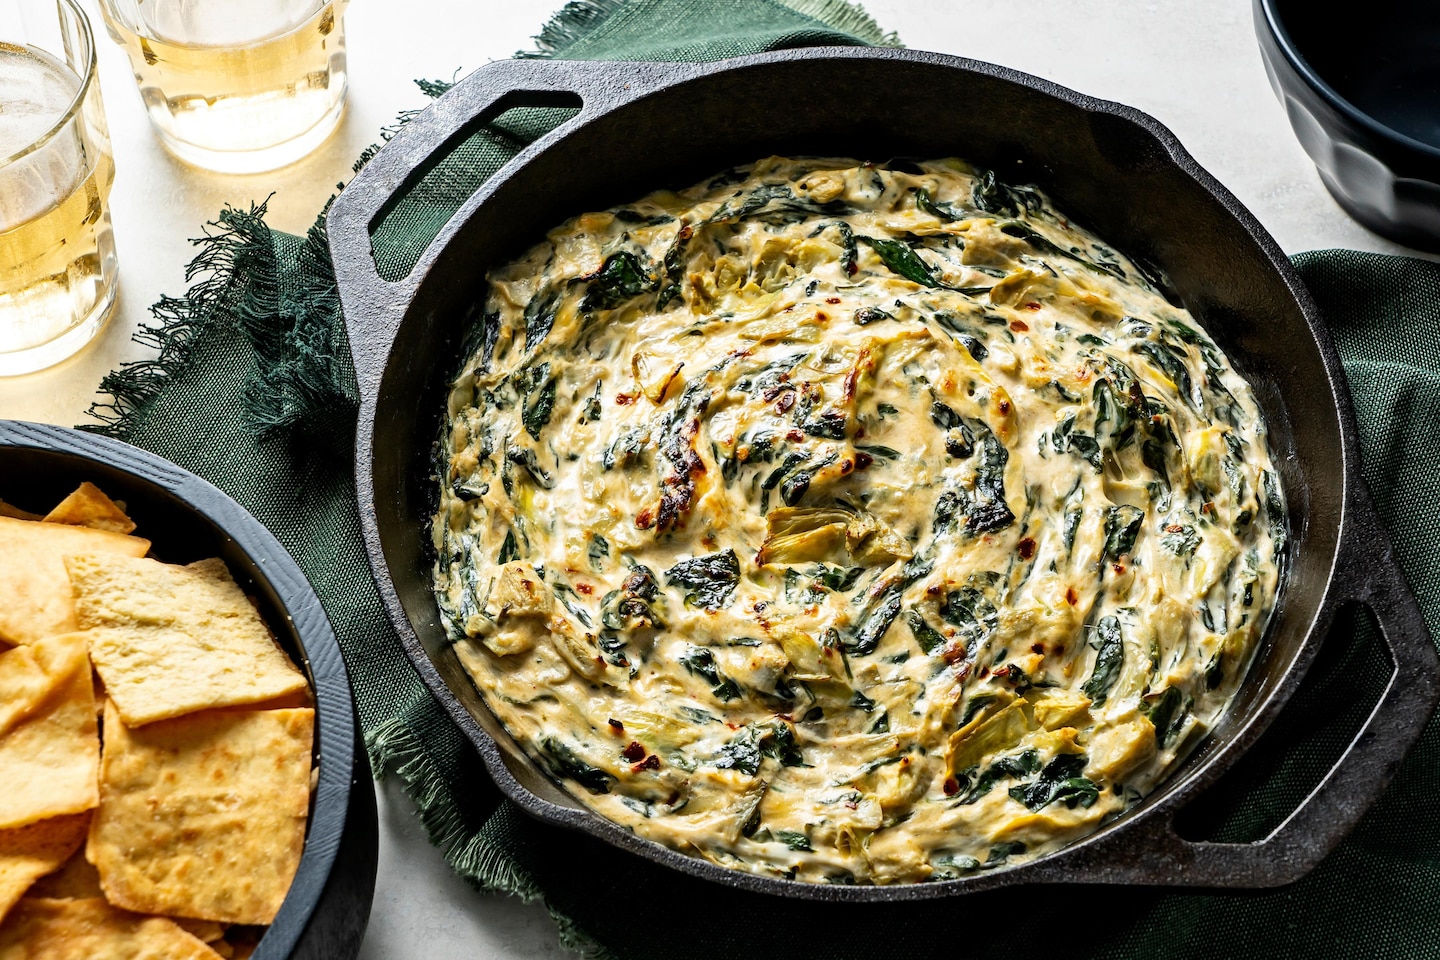 12 crowd-pleasing dip recipes for your Super Bowl party